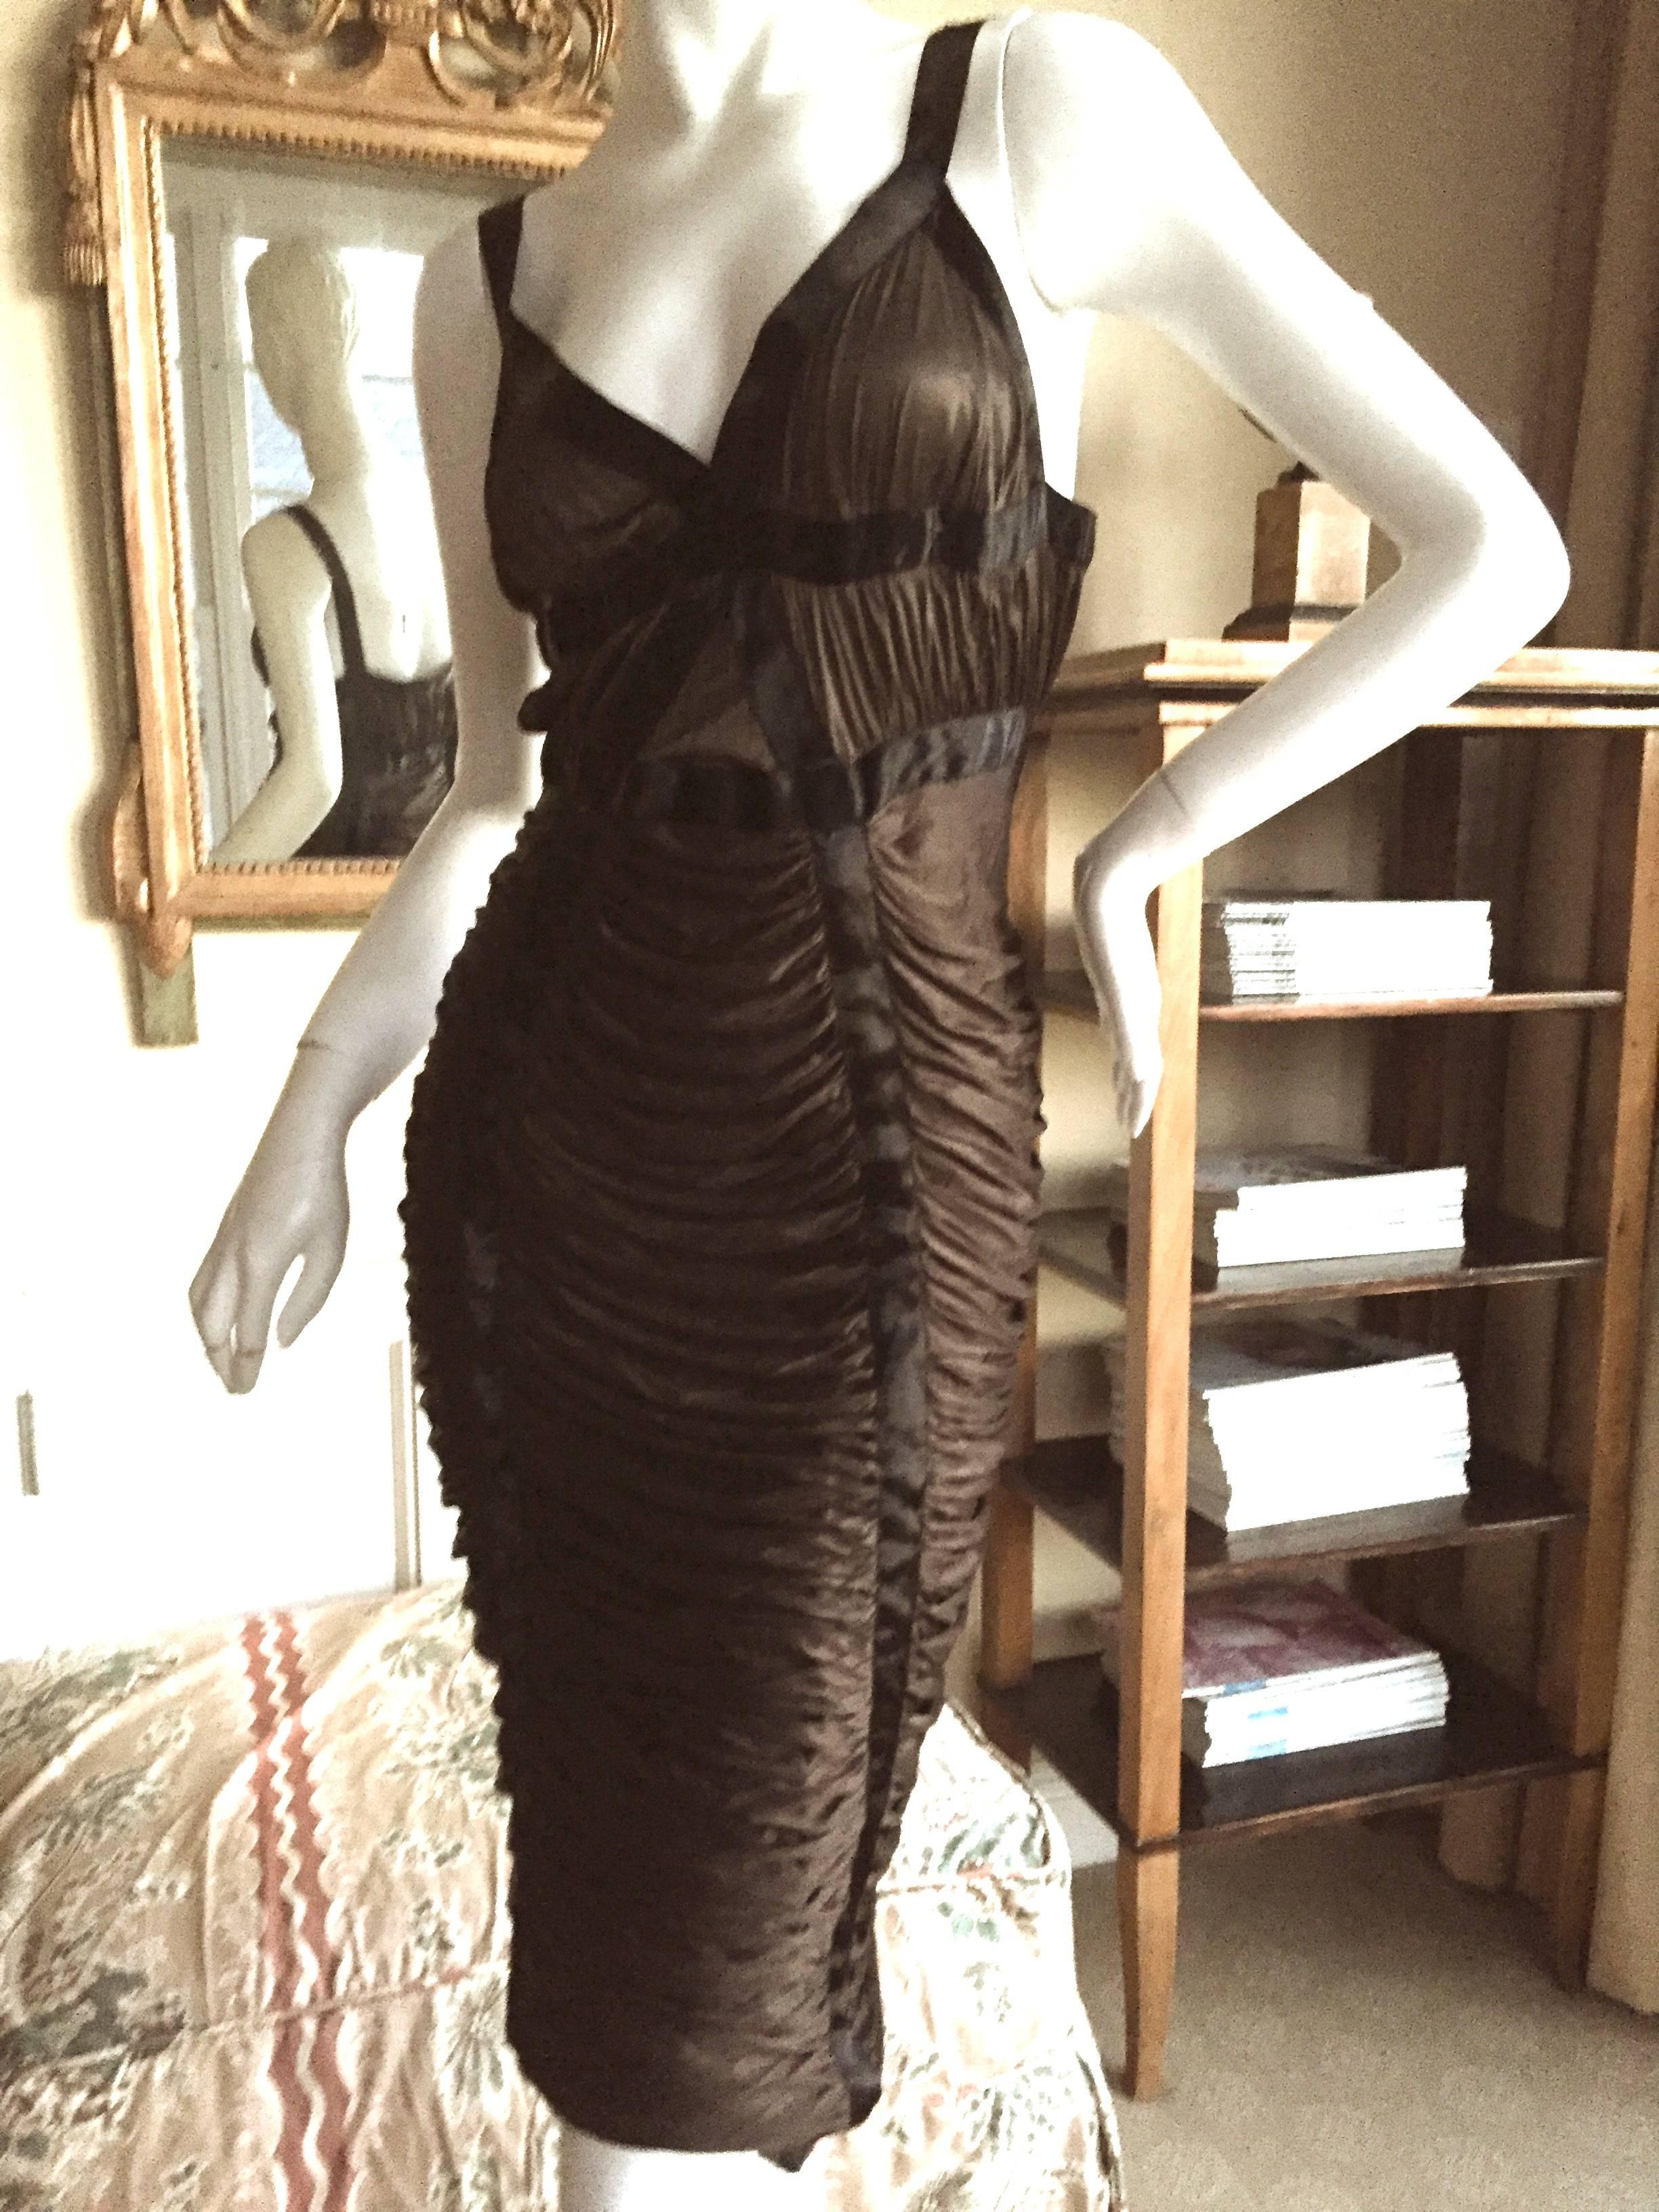 Sexy brown and black draped viscose dress with velvet accents by Tom Ford for Yves Saint Laurent Rive Guache Spring 2003.
Size M
Bust 34